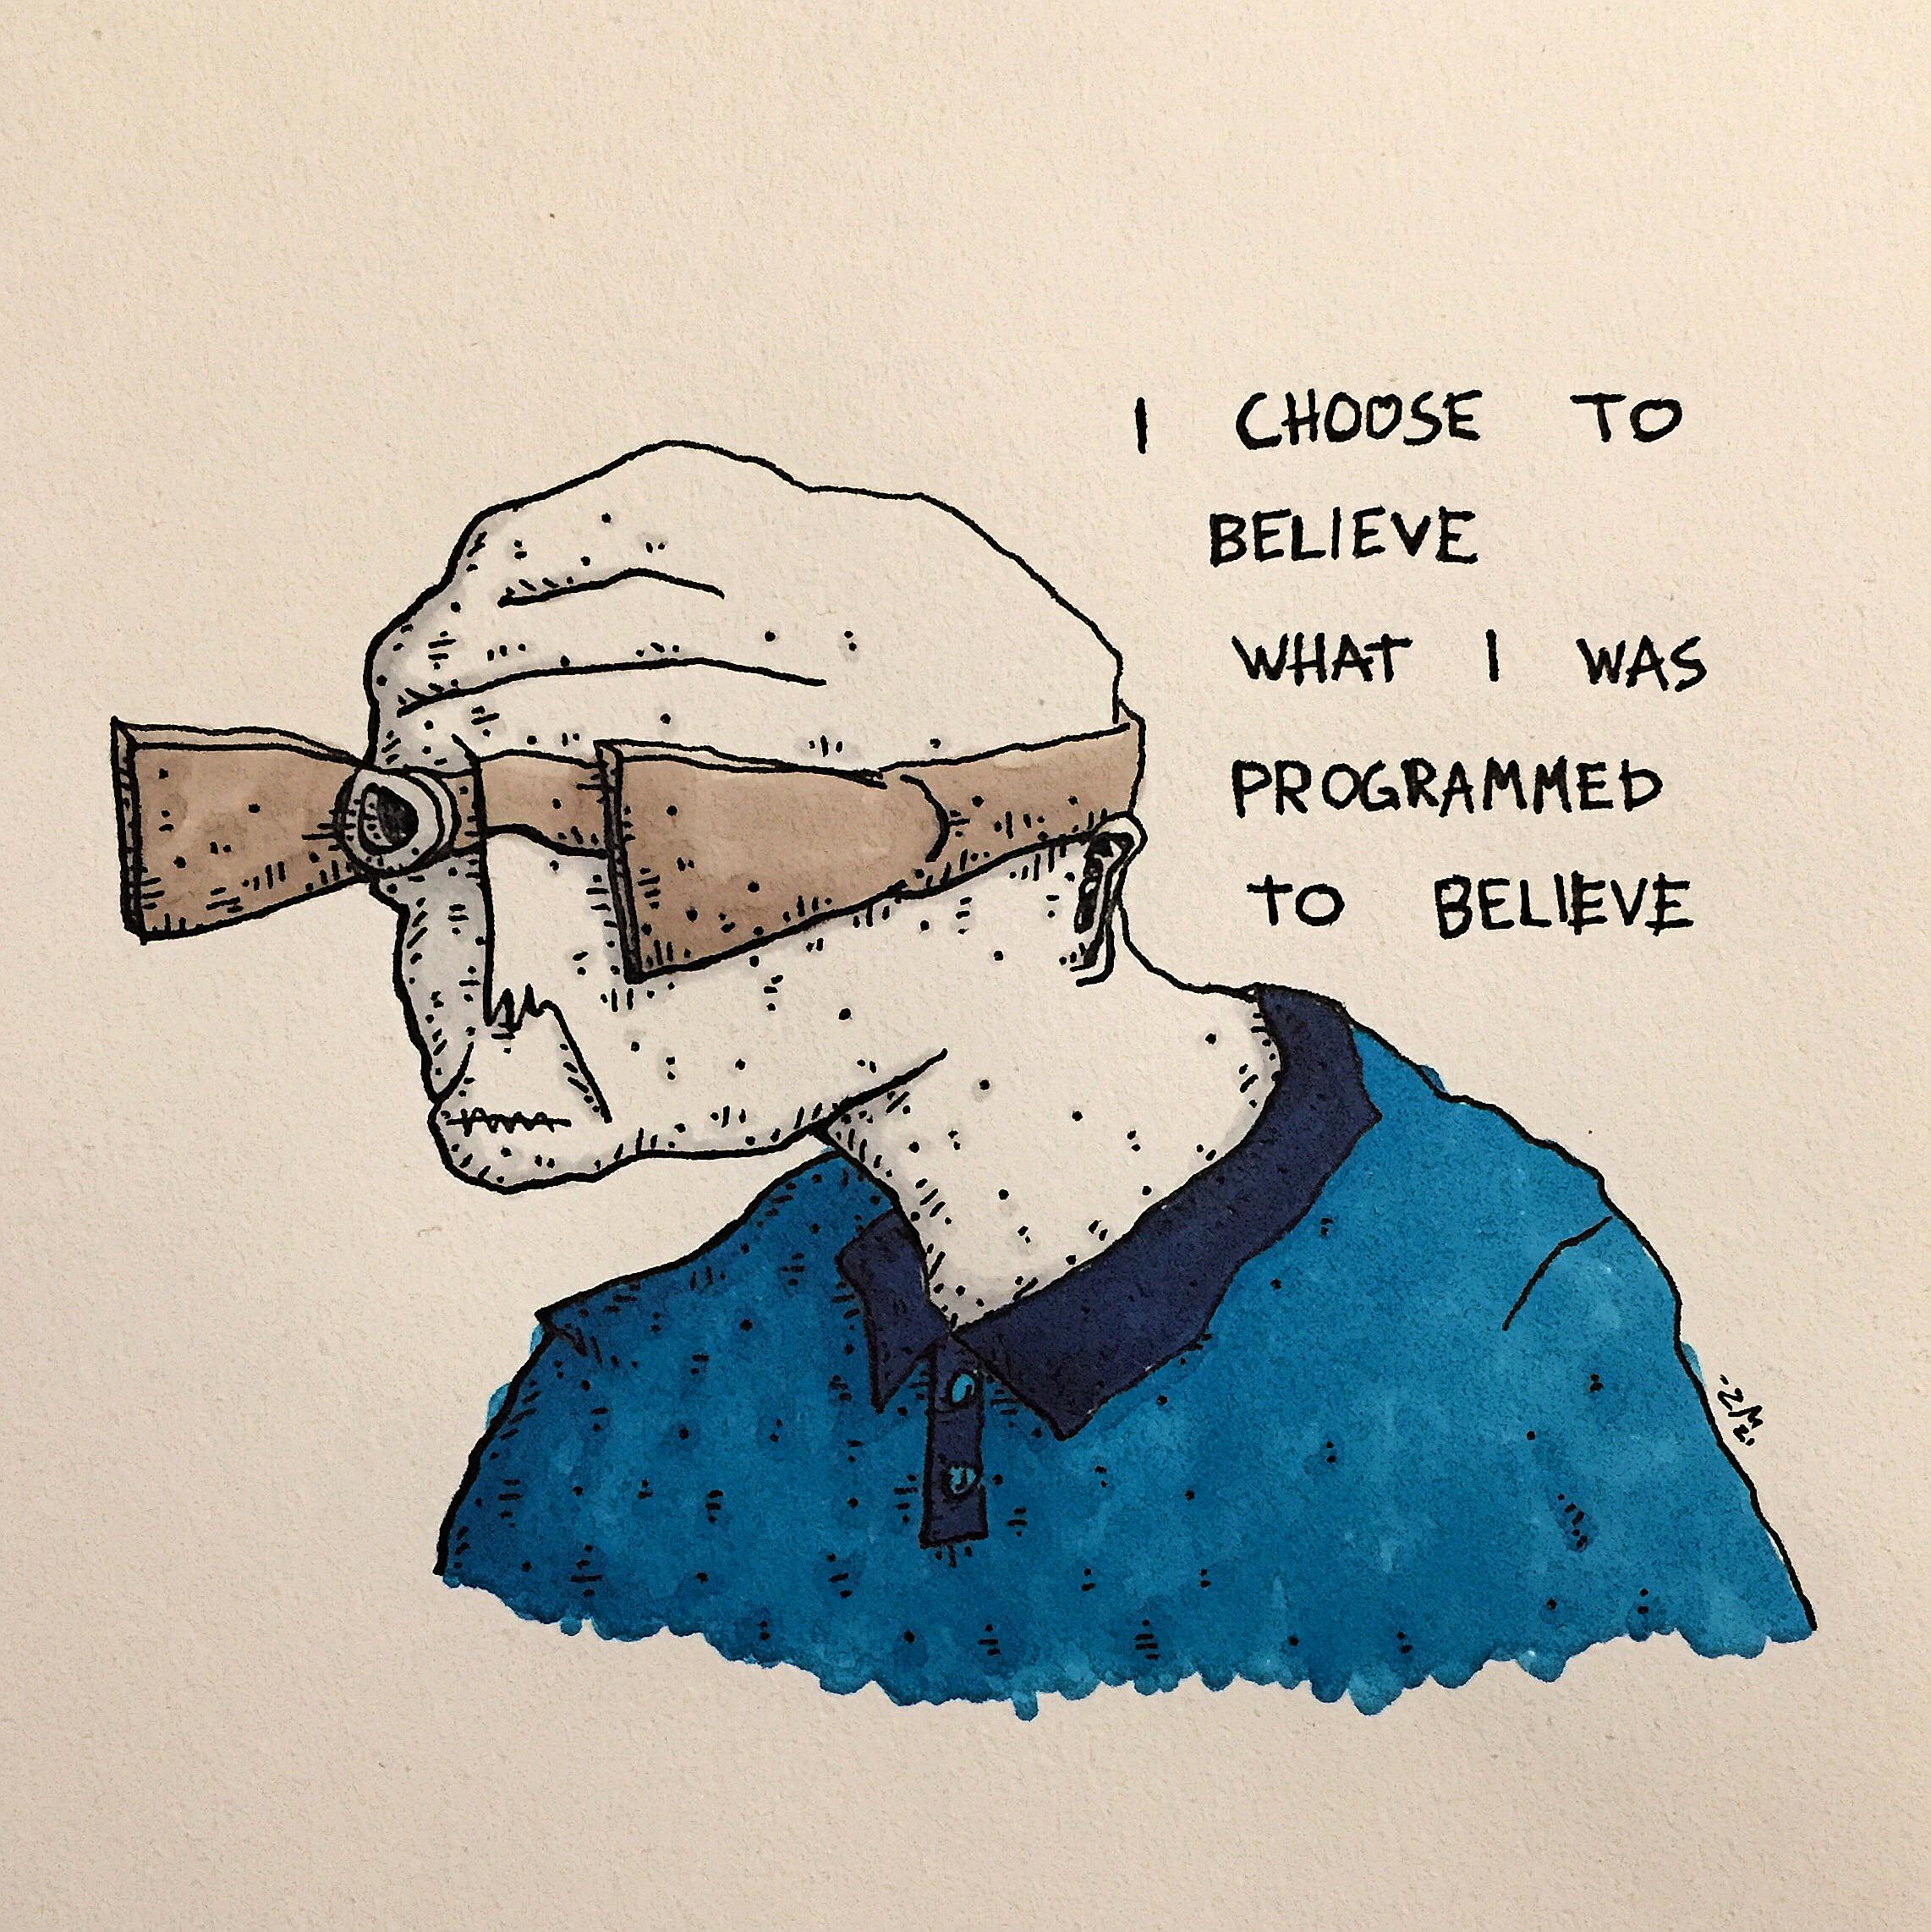 spirit wants us to remove our blinders